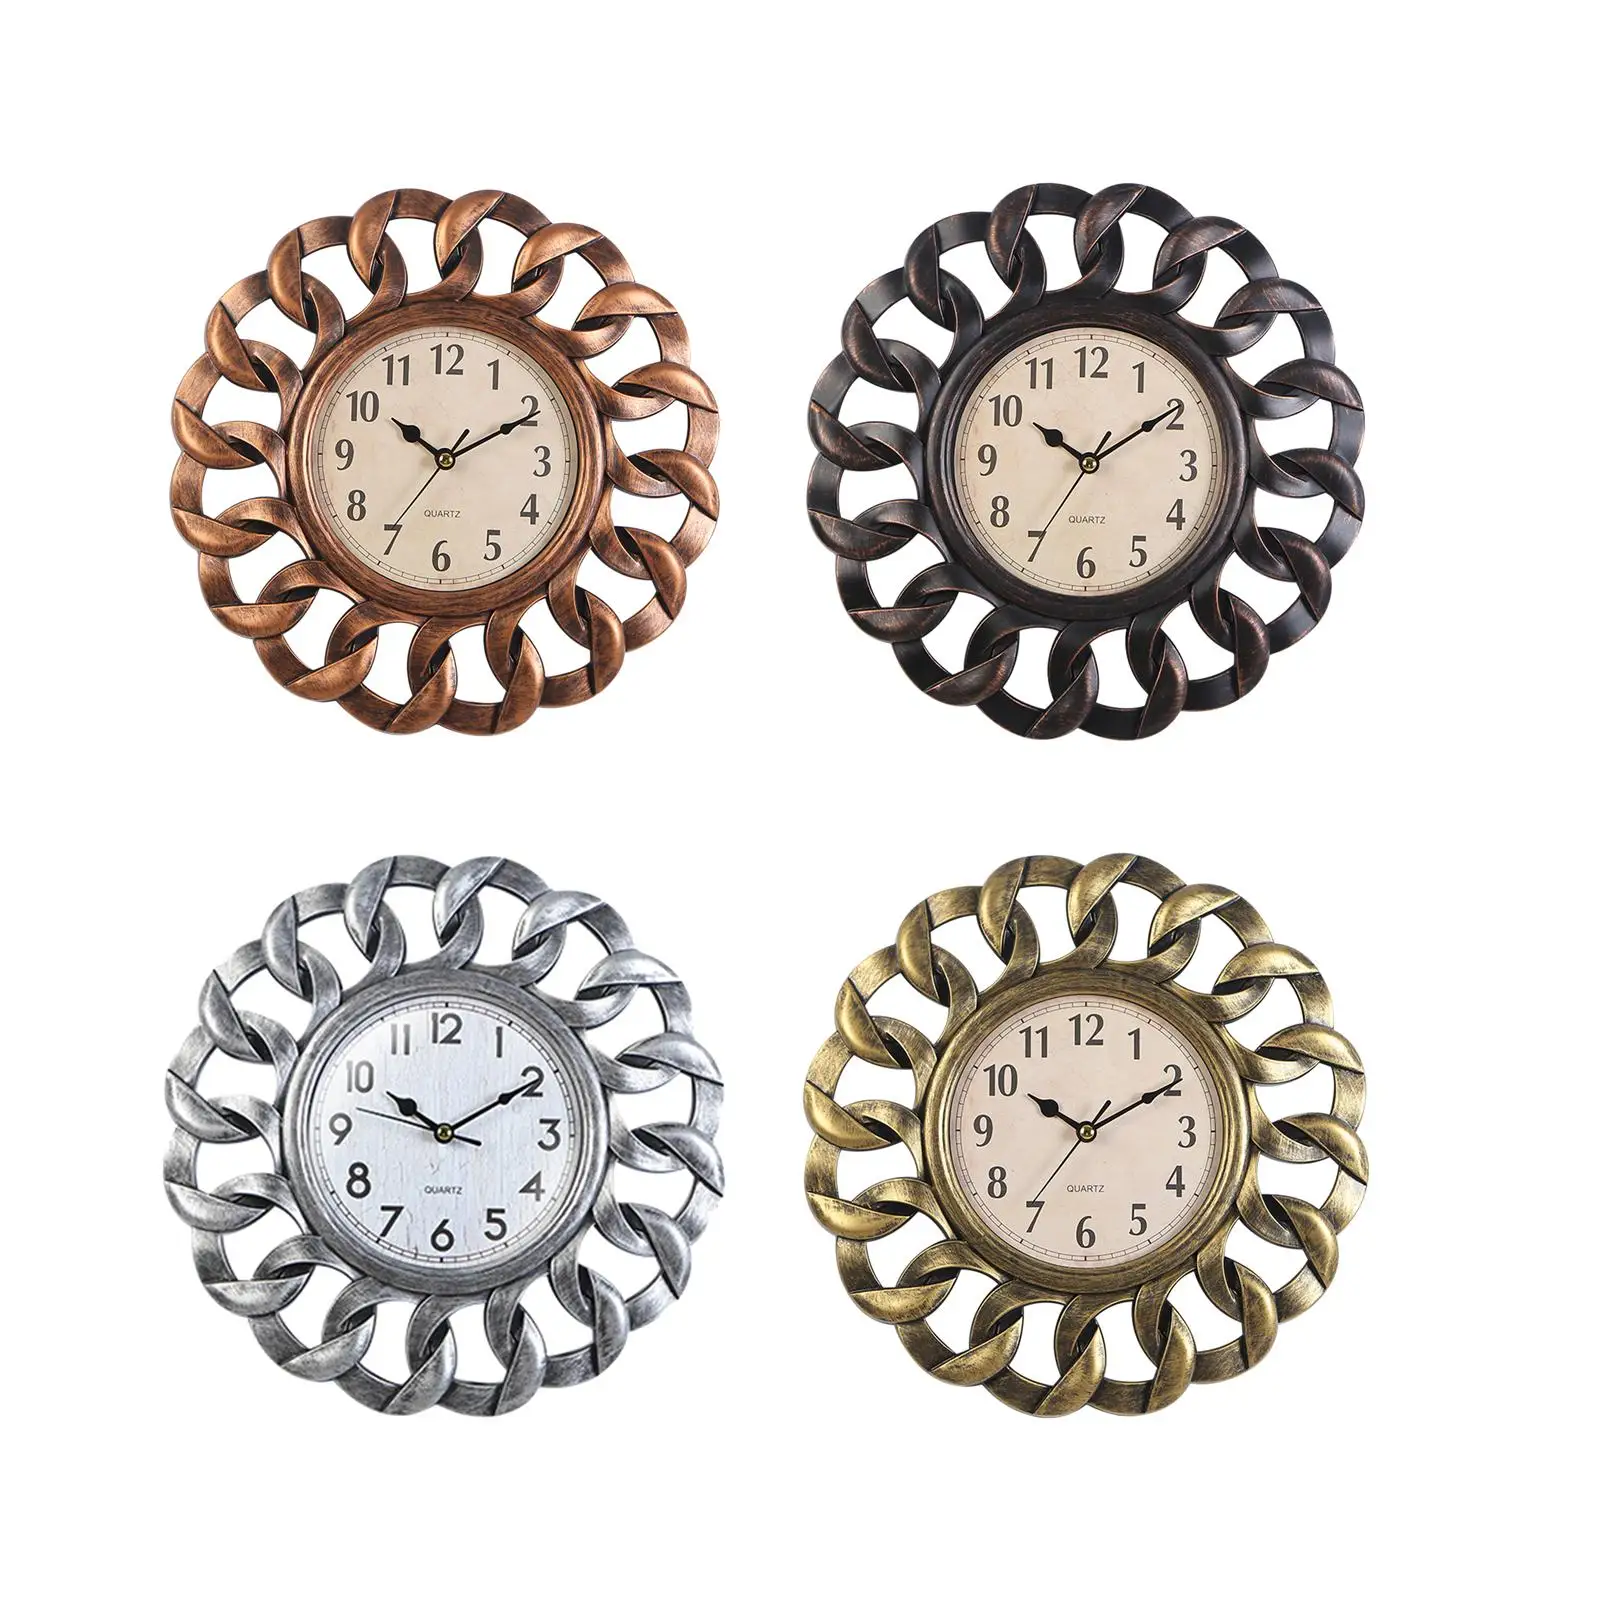 Retro Wall Clock Non Ticking Fashion Easy Read Vintage Battery Operated Plastic Round Hanging Clocks for Decor Cafe Kitchen Home